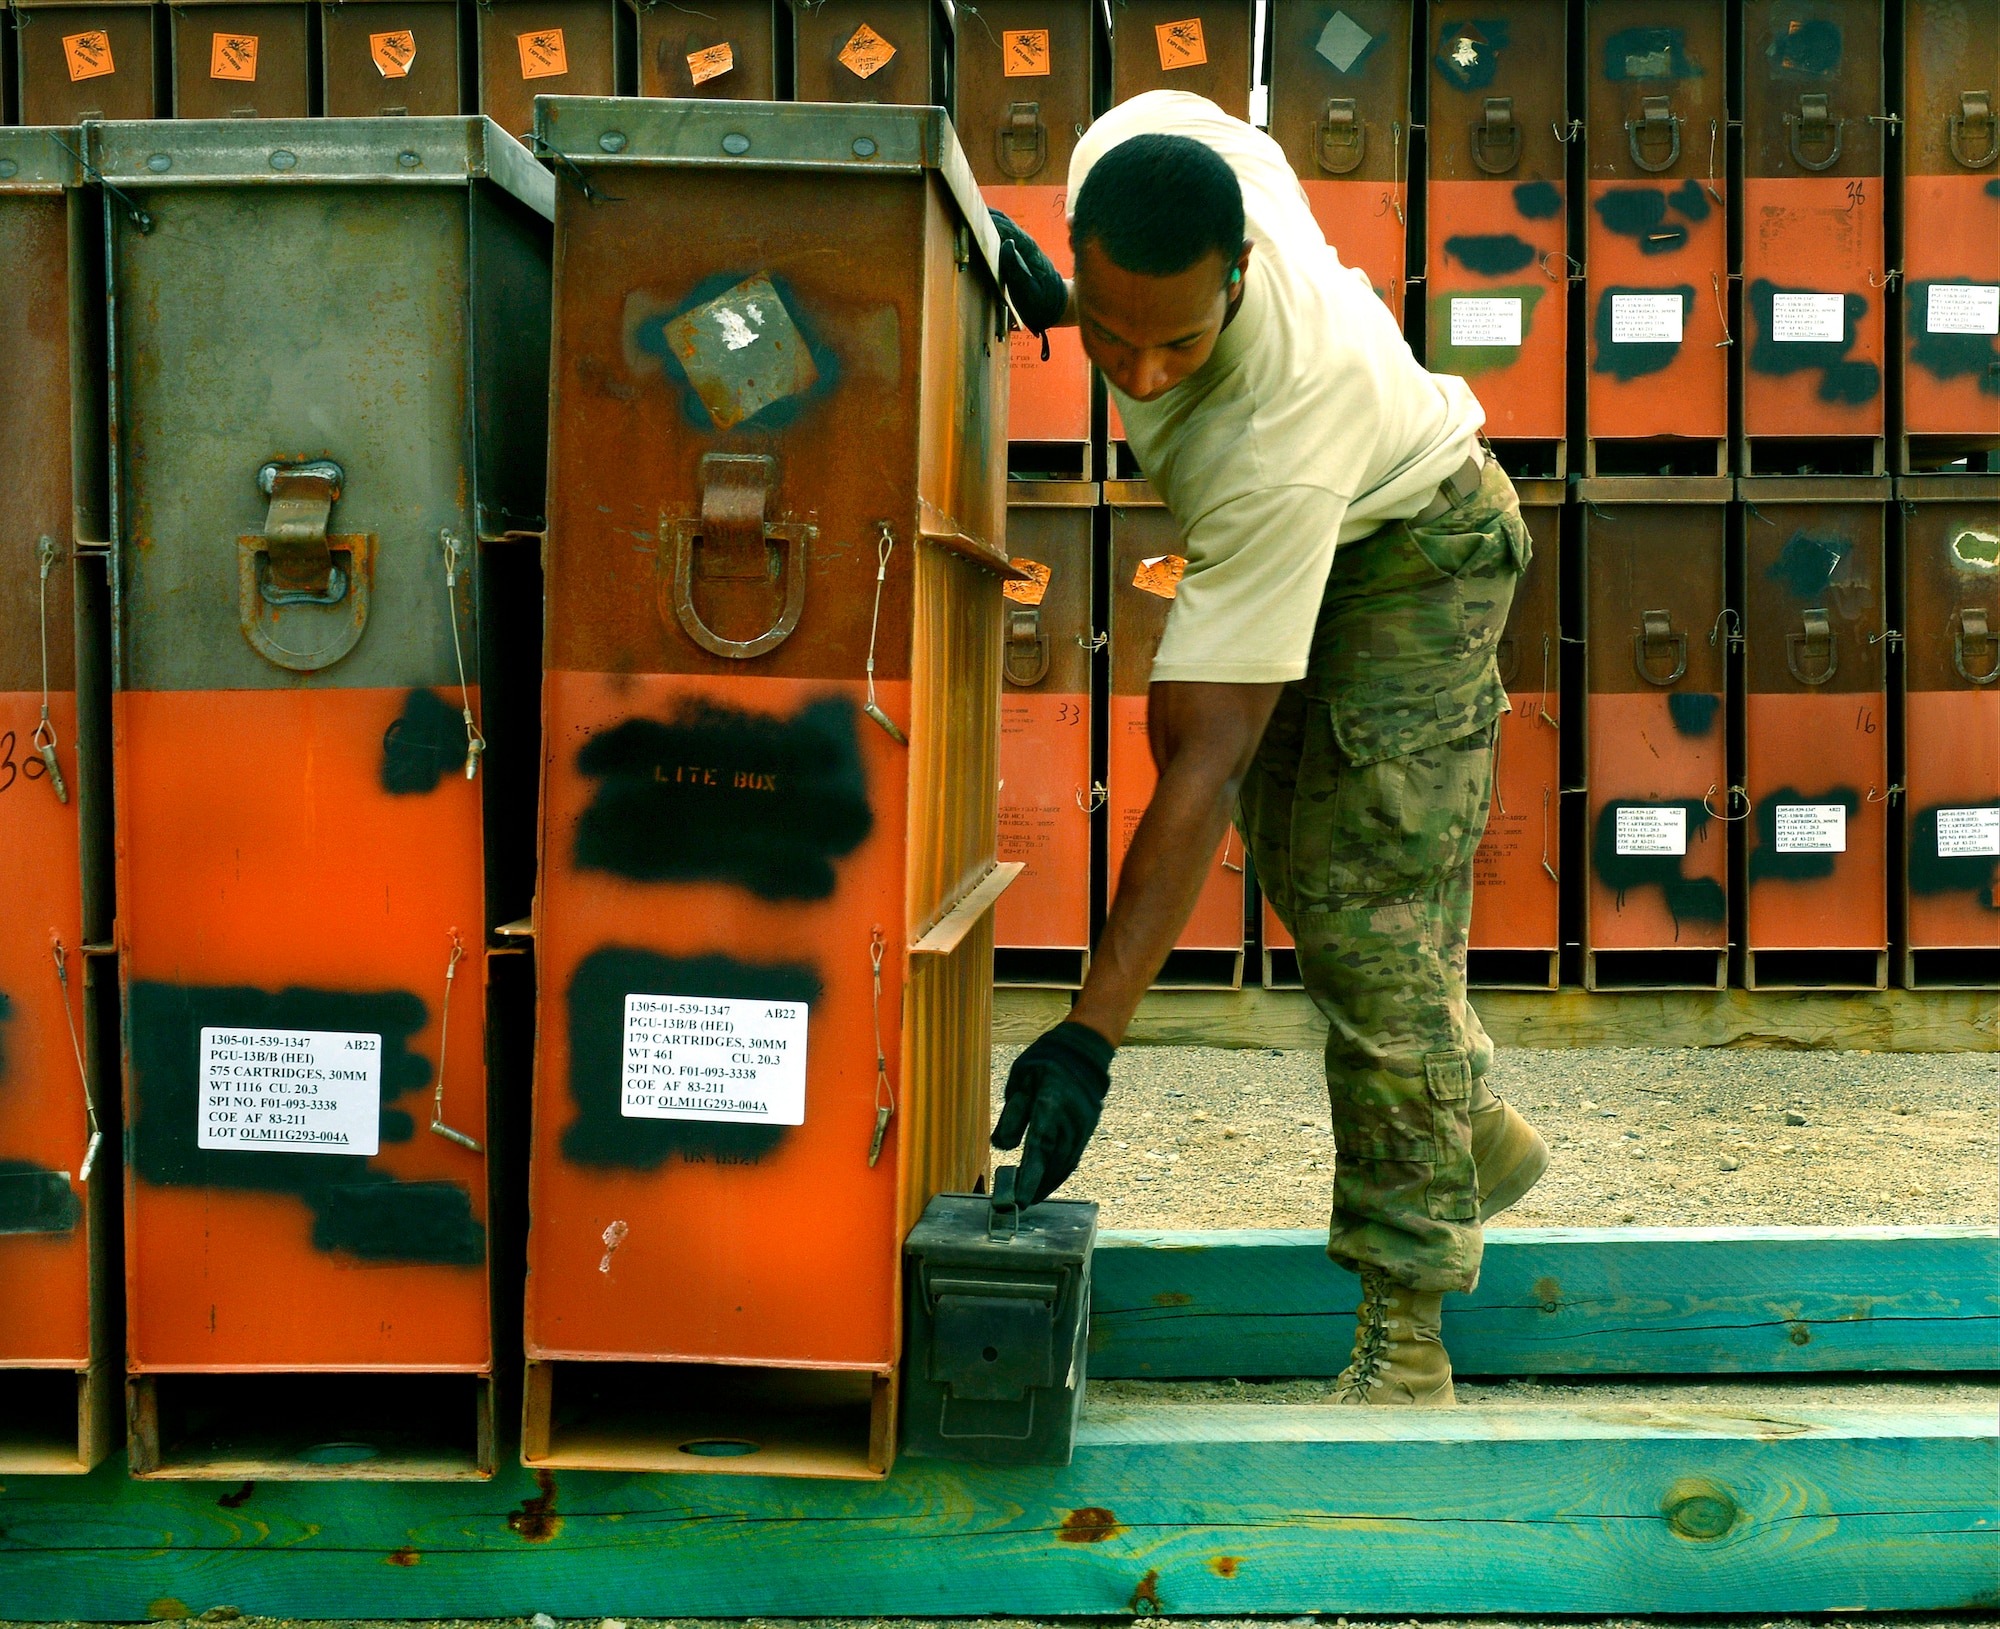 Staff Sgt. Dominique Freeman, 455th Expeditionary Maintenance Squadron precision-guided munitions crew chief, places an empty ammo box as a marker in the ammo storage yard at Bagram Airfield, Afghanistan, June 13, 2013. The 455th EMXS ammo flight is responsible for providing munitions and countermeasures, such as chaff and flare, to U.S. Air Force units as well as providing storage facilities for the other military branches here. Freeman is deployed from Moody Air Force Base, Ga. and is a native of Jacksonville, Fla. (U.S. Air Force photo/ Staff Sgt. Stephenie Wade)